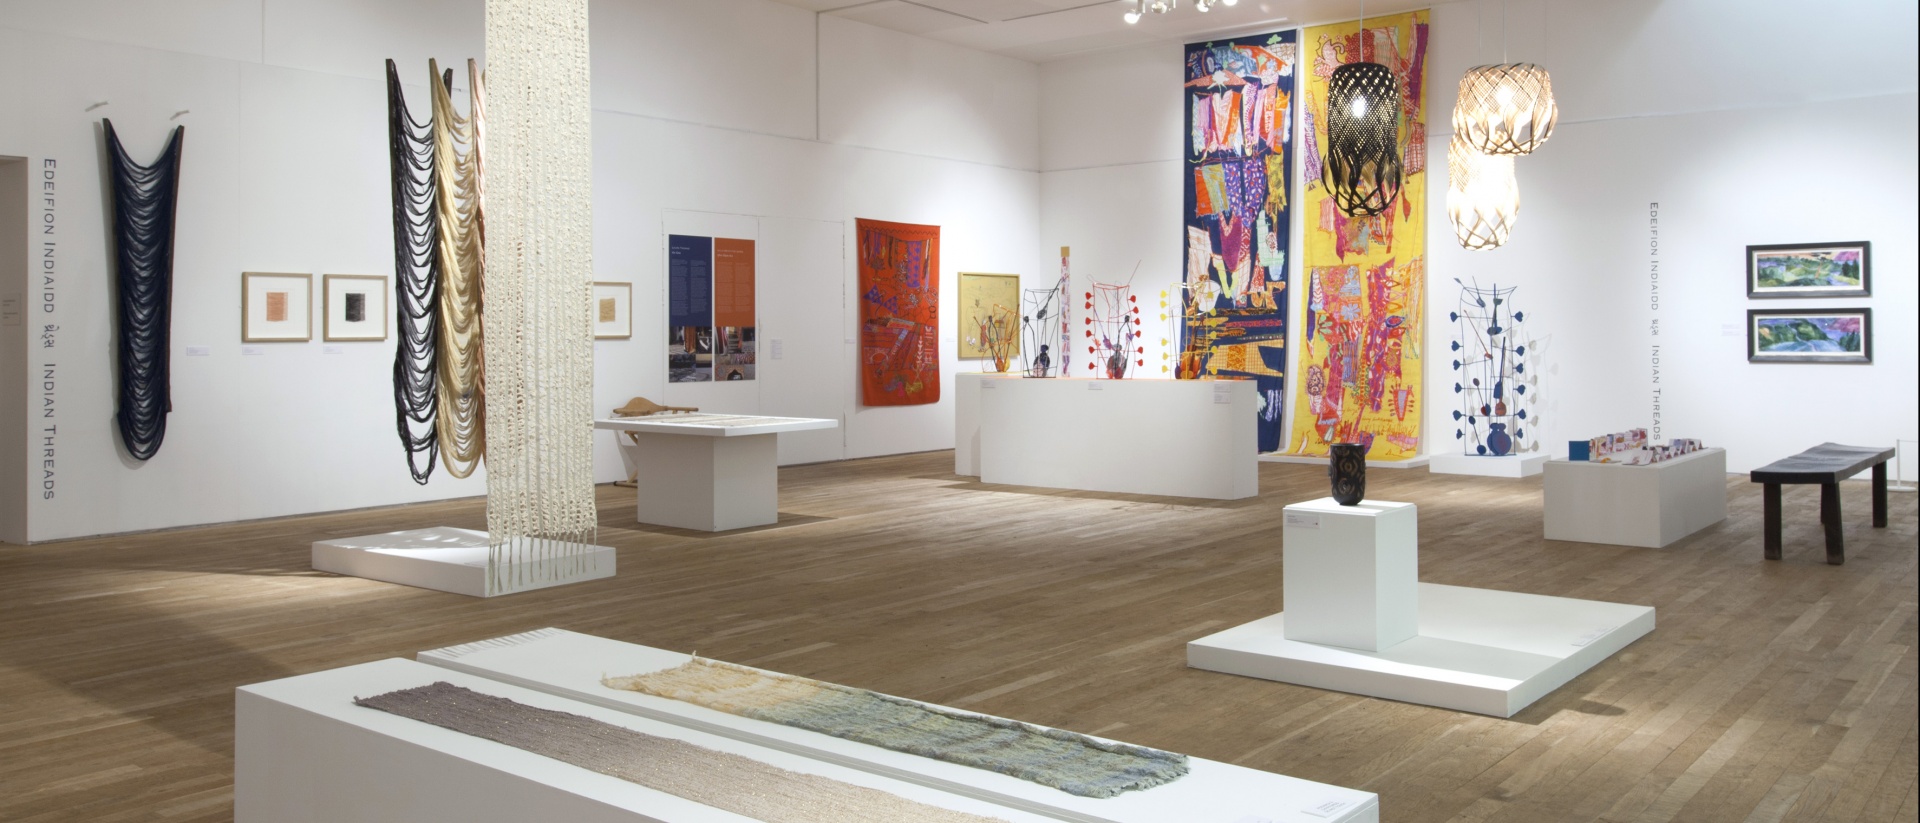 Exhibition of colourful textiles within a white space